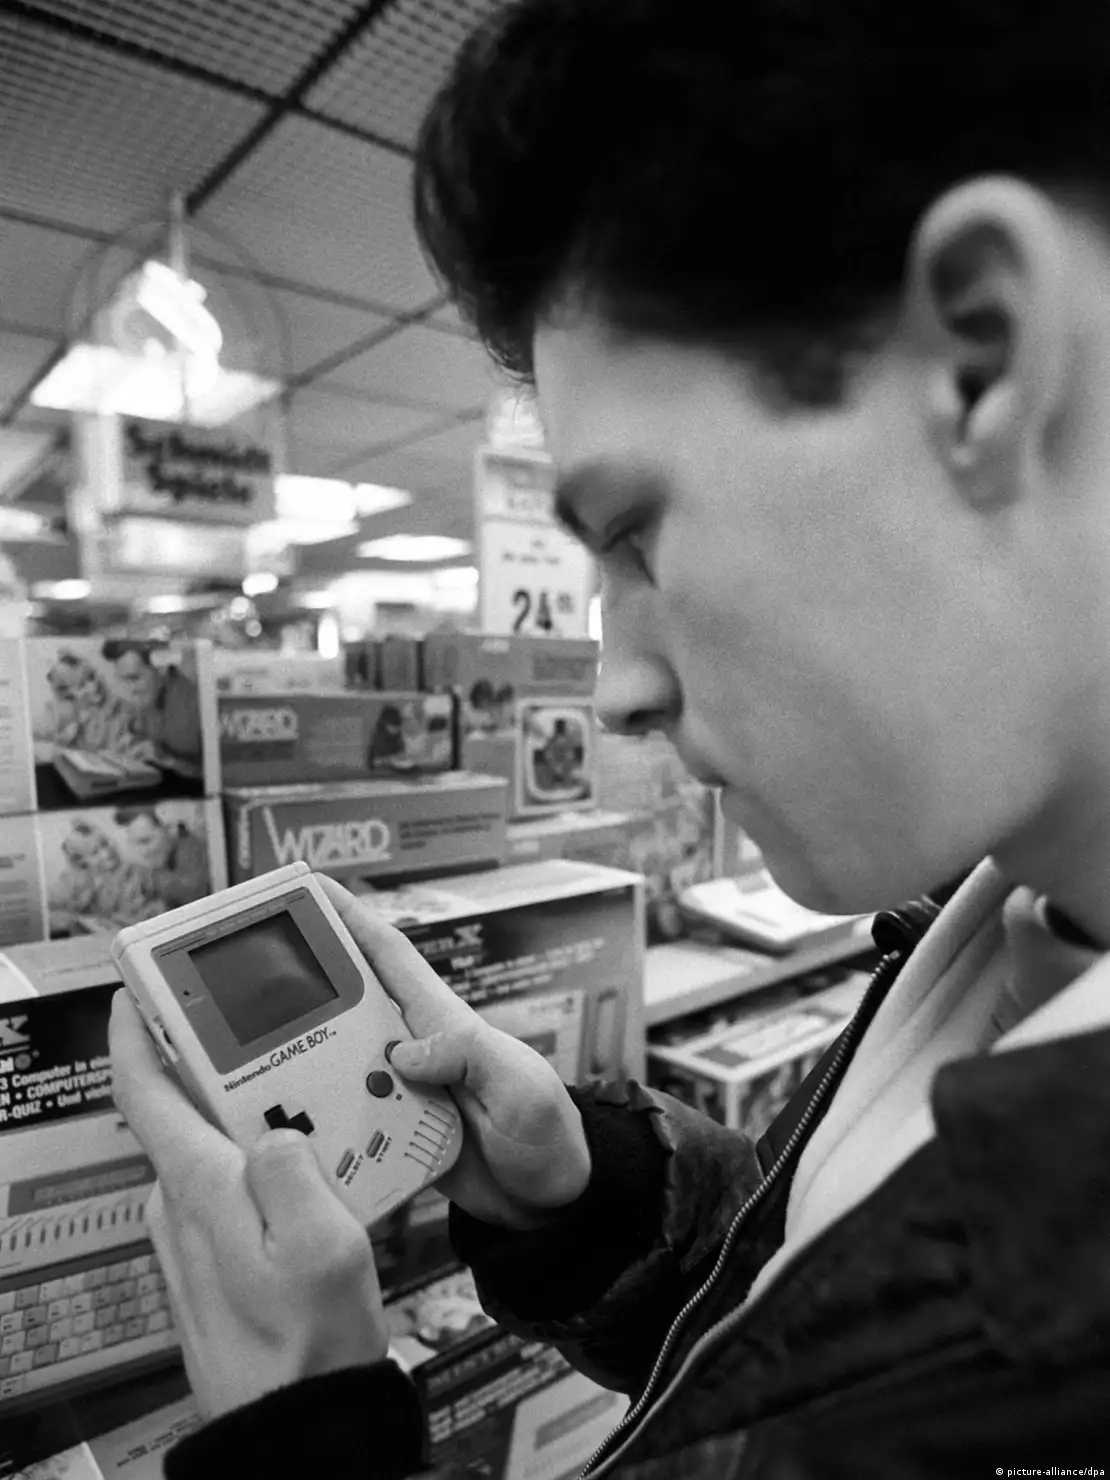 The Game Boy turns 25: How a 'grey brick' took over the world of